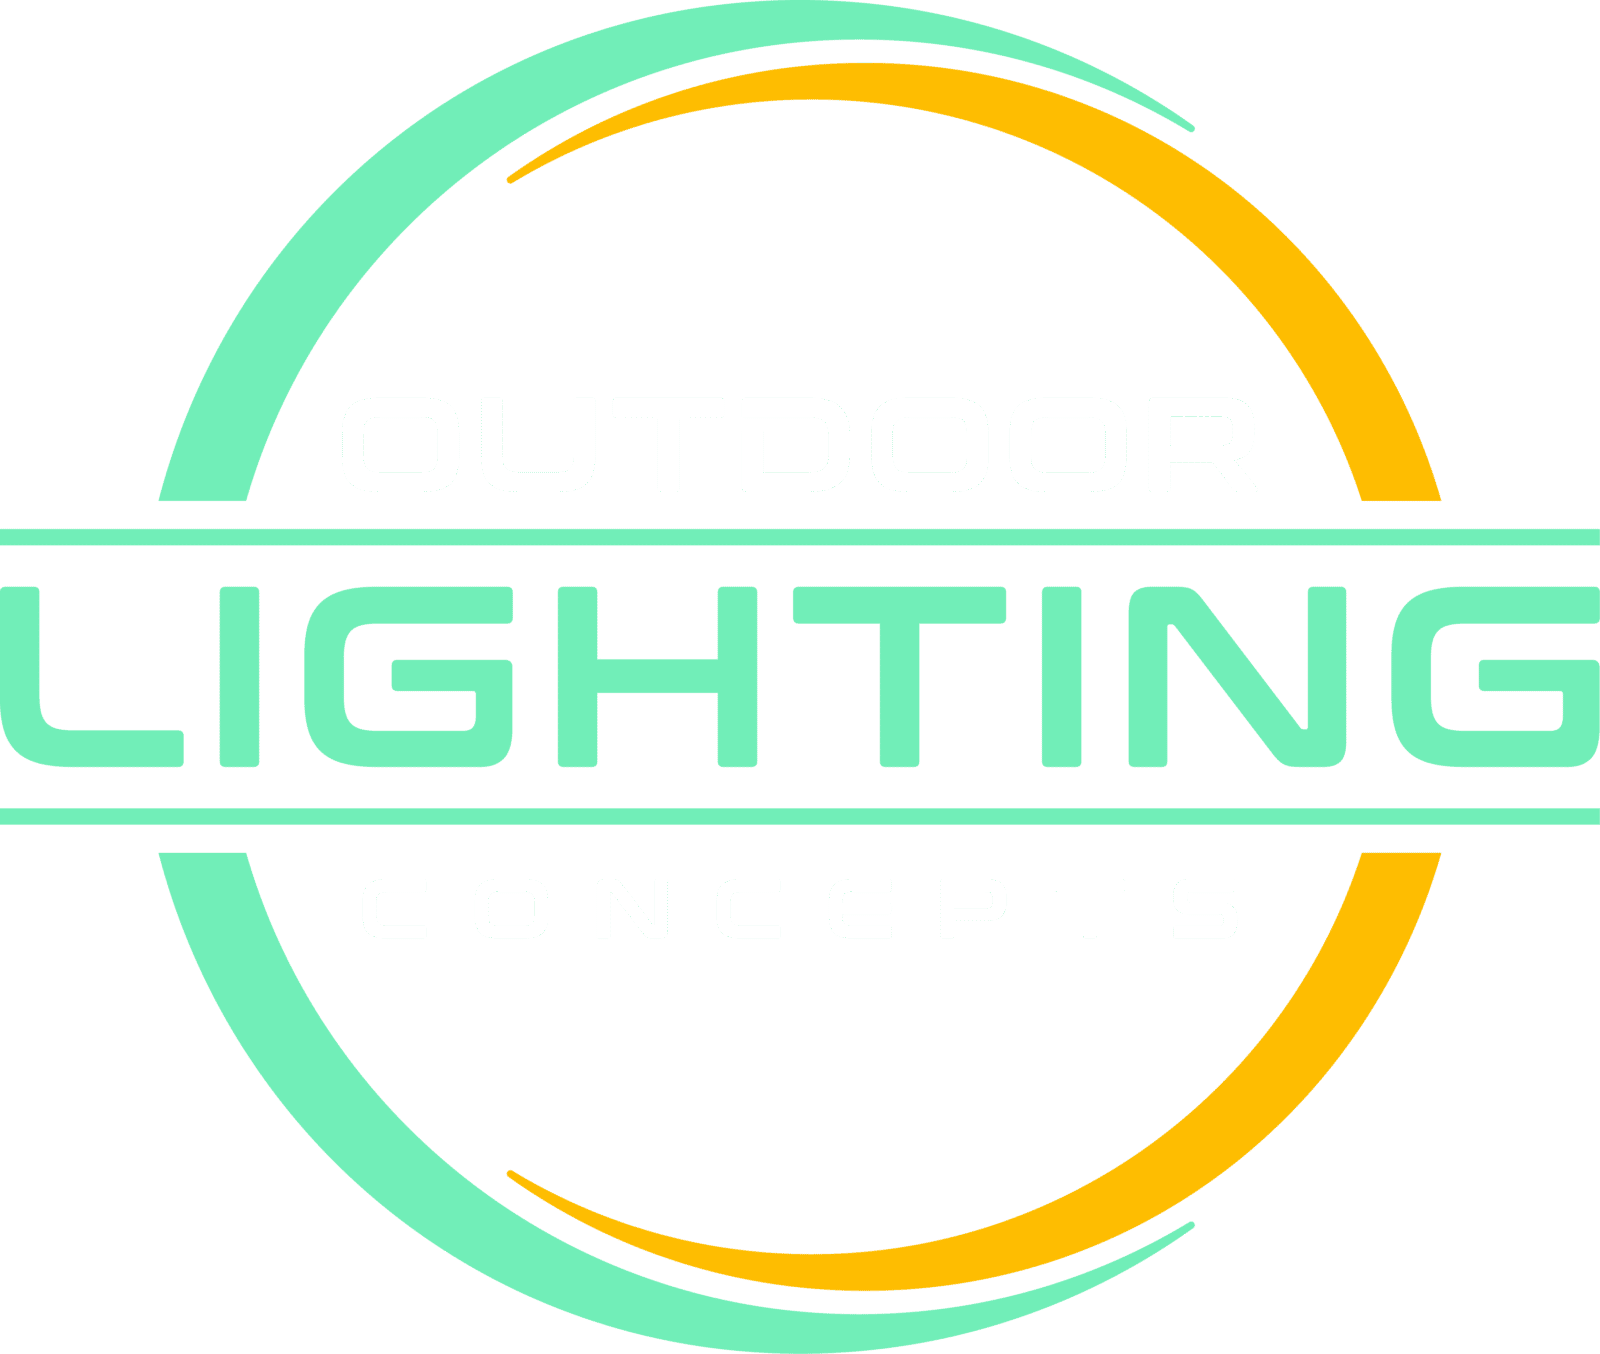 img/outdoor-lighting-concepts-logo1.png